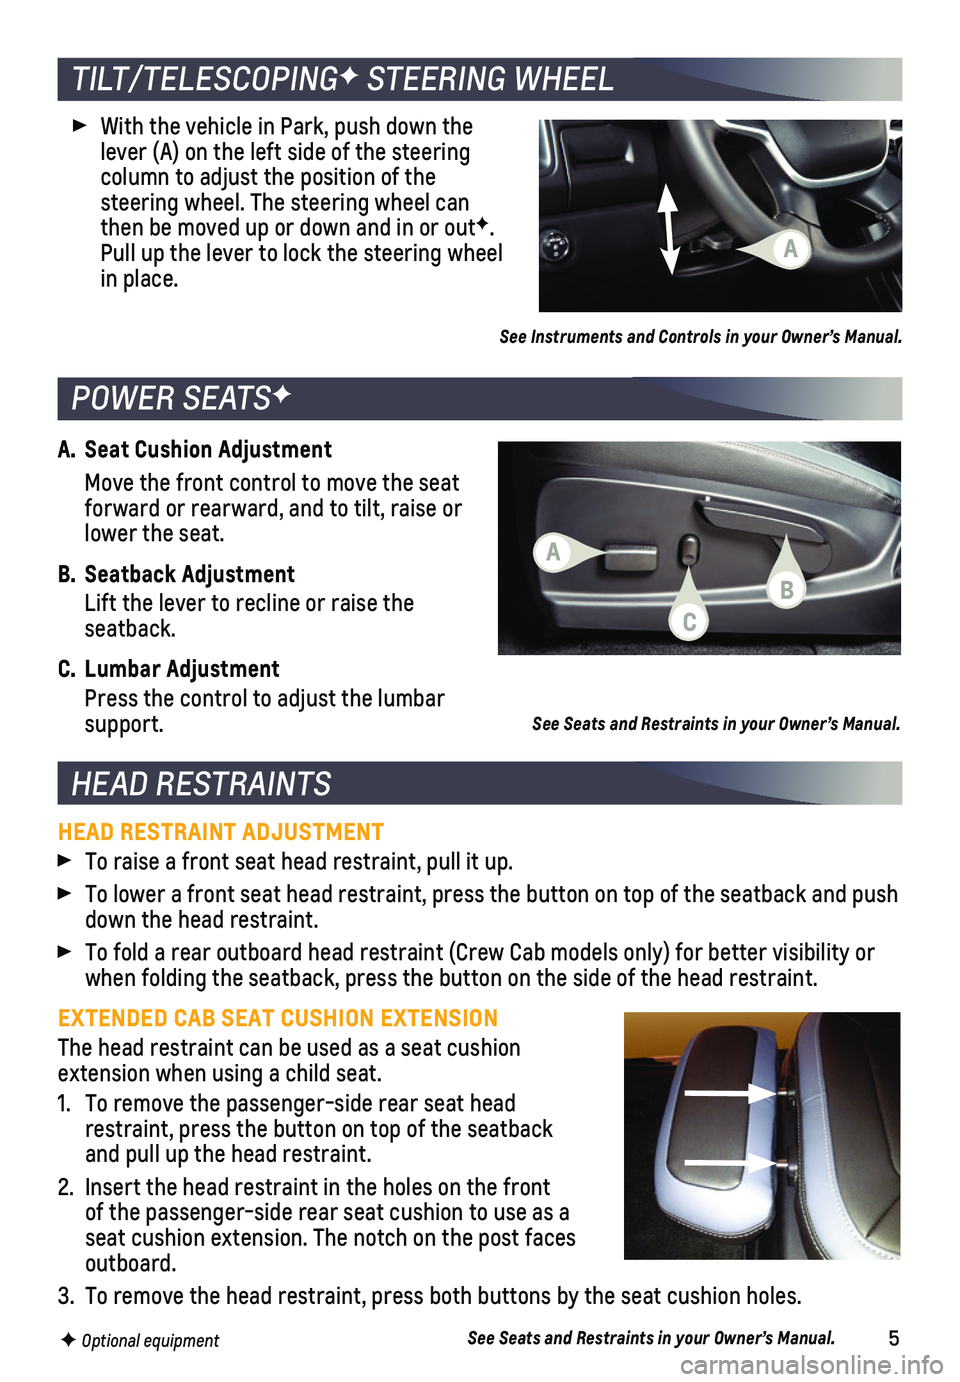 CHEVROLET COLORADO 2020  Get To Know Guide 5
A. Seat Cushion Adjustment
 Move the front control to move the seat forward or rearward, and to tilt, raise or lower the seat.
B. Seatback Adjustment
 Lift the lever to recline or raise the  seatbac